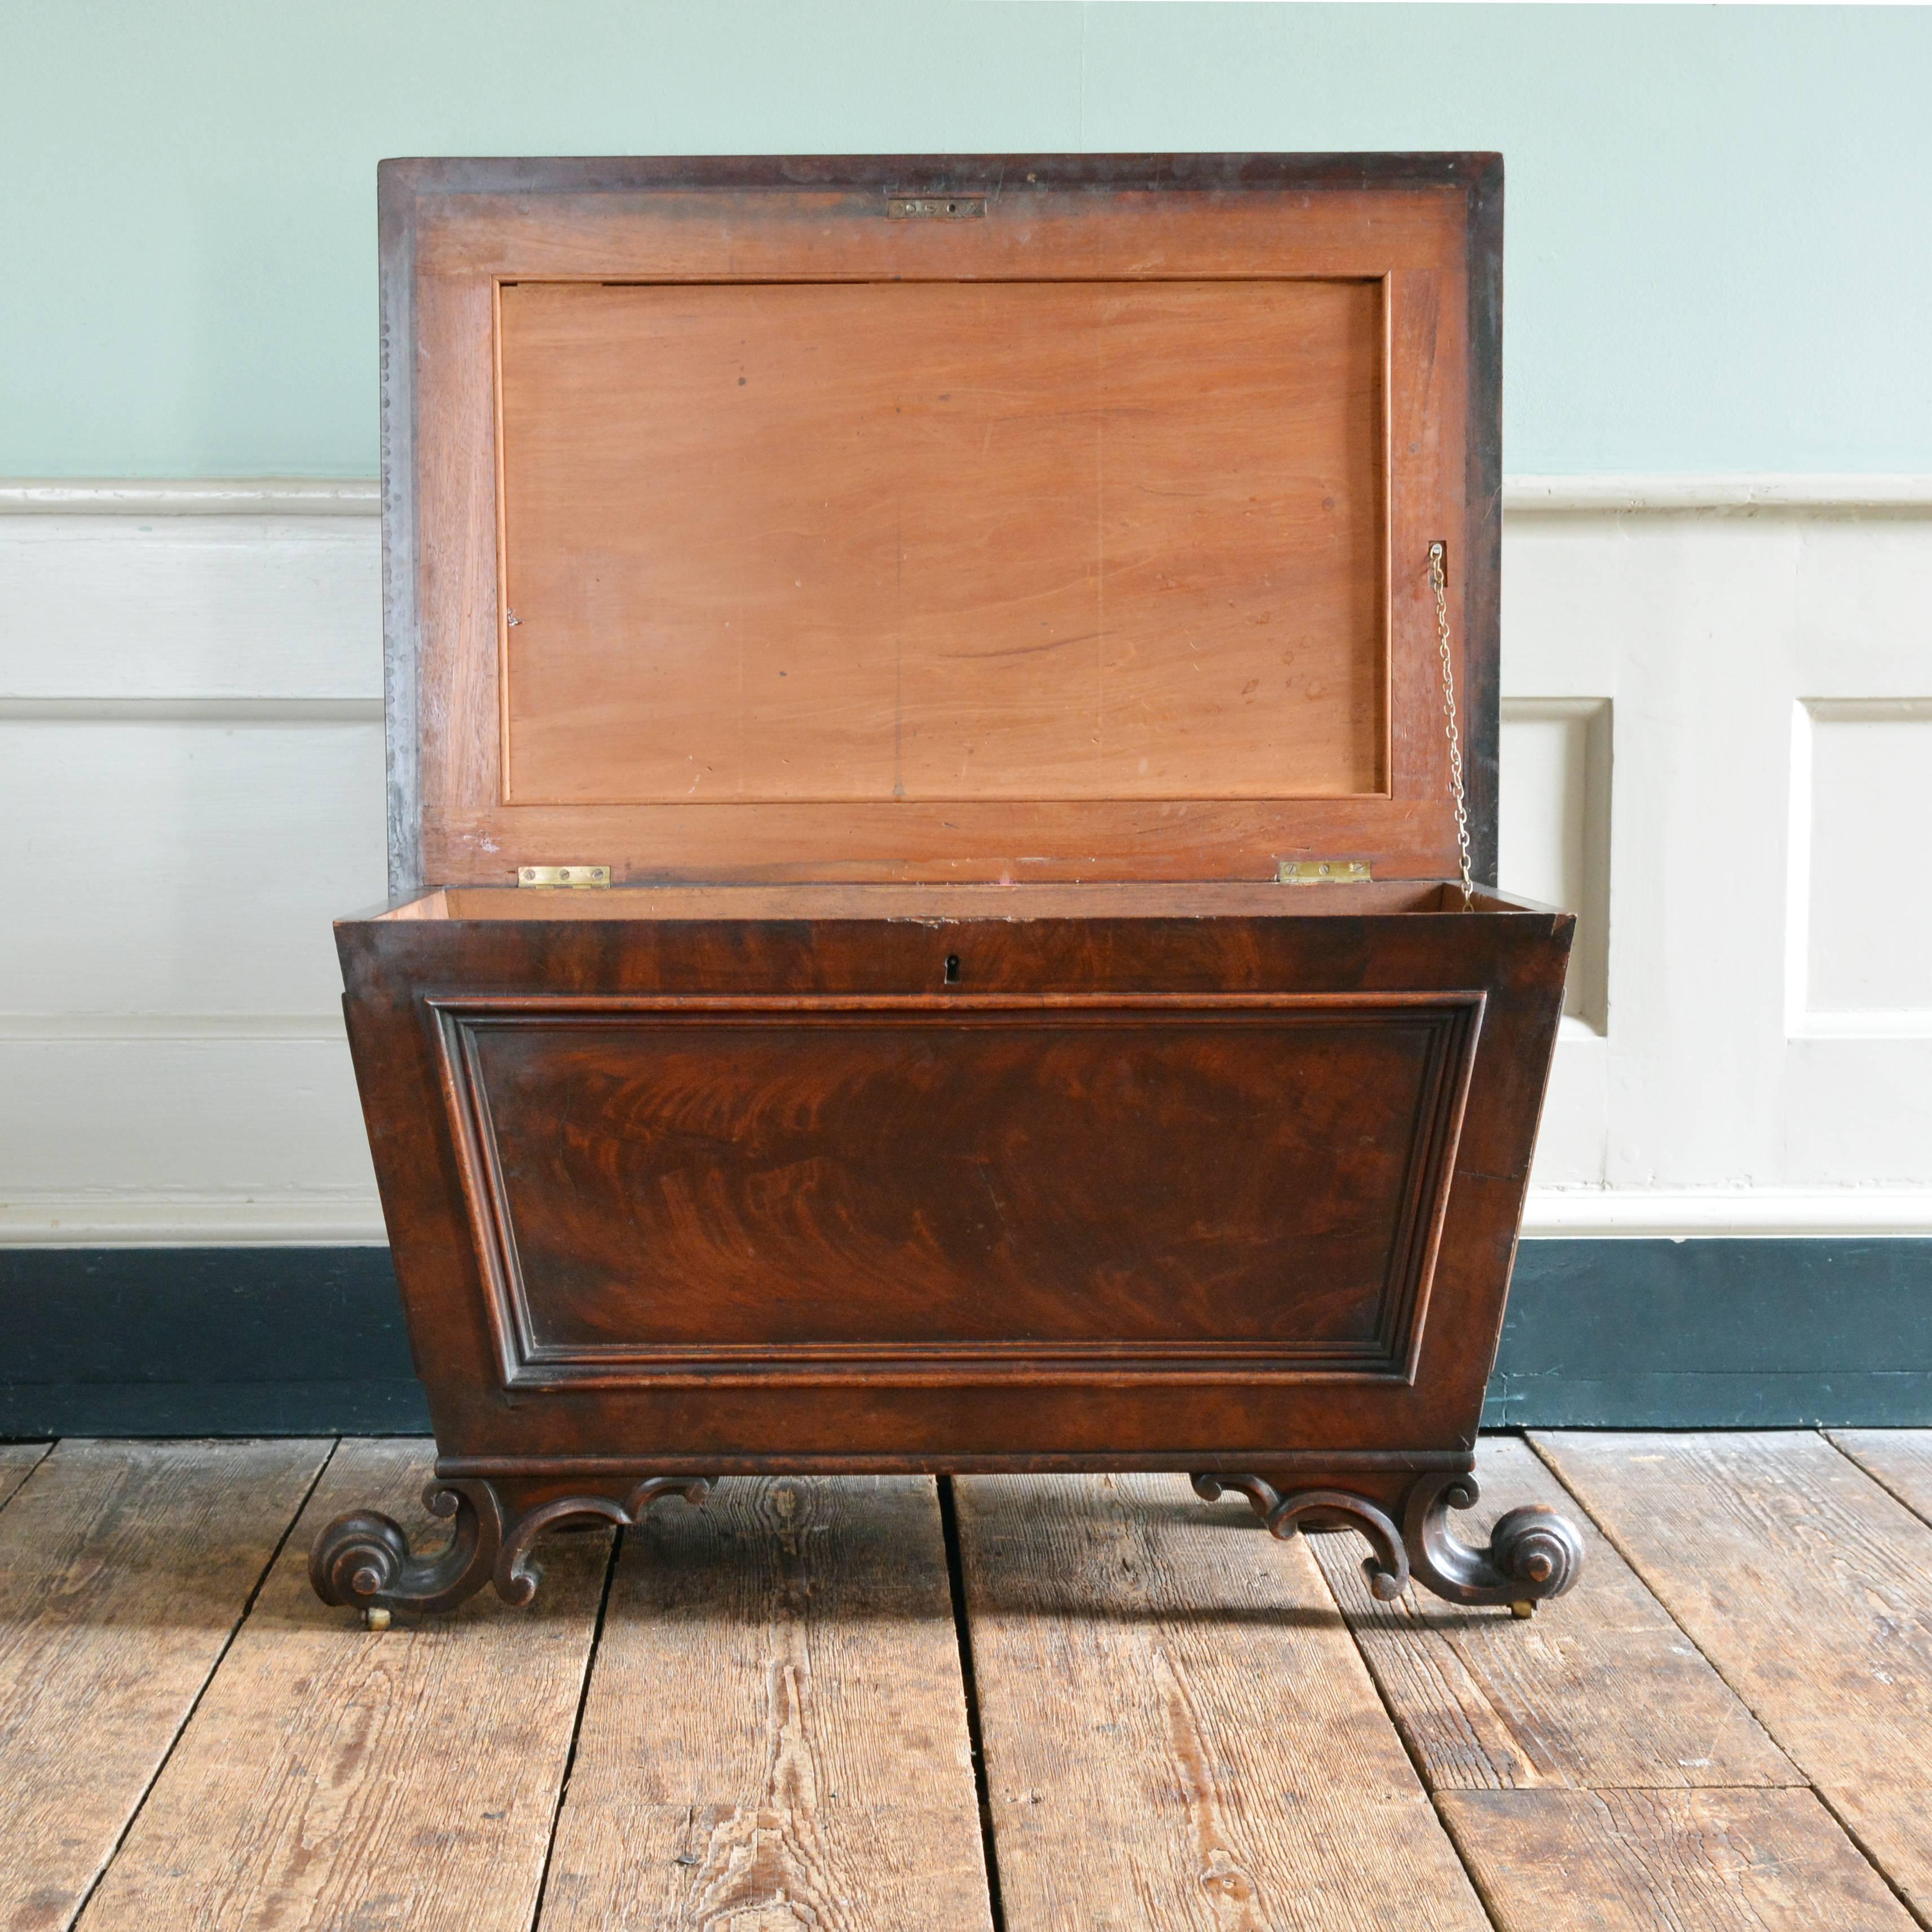 A George IV mahogany sarcophagus cellarette, the hinged lid enclosing fitted interior, stamped '10118'.

Available to view at Brunswick House, London.

Measures: Width 86cm, height 60cm, depth 58cm.